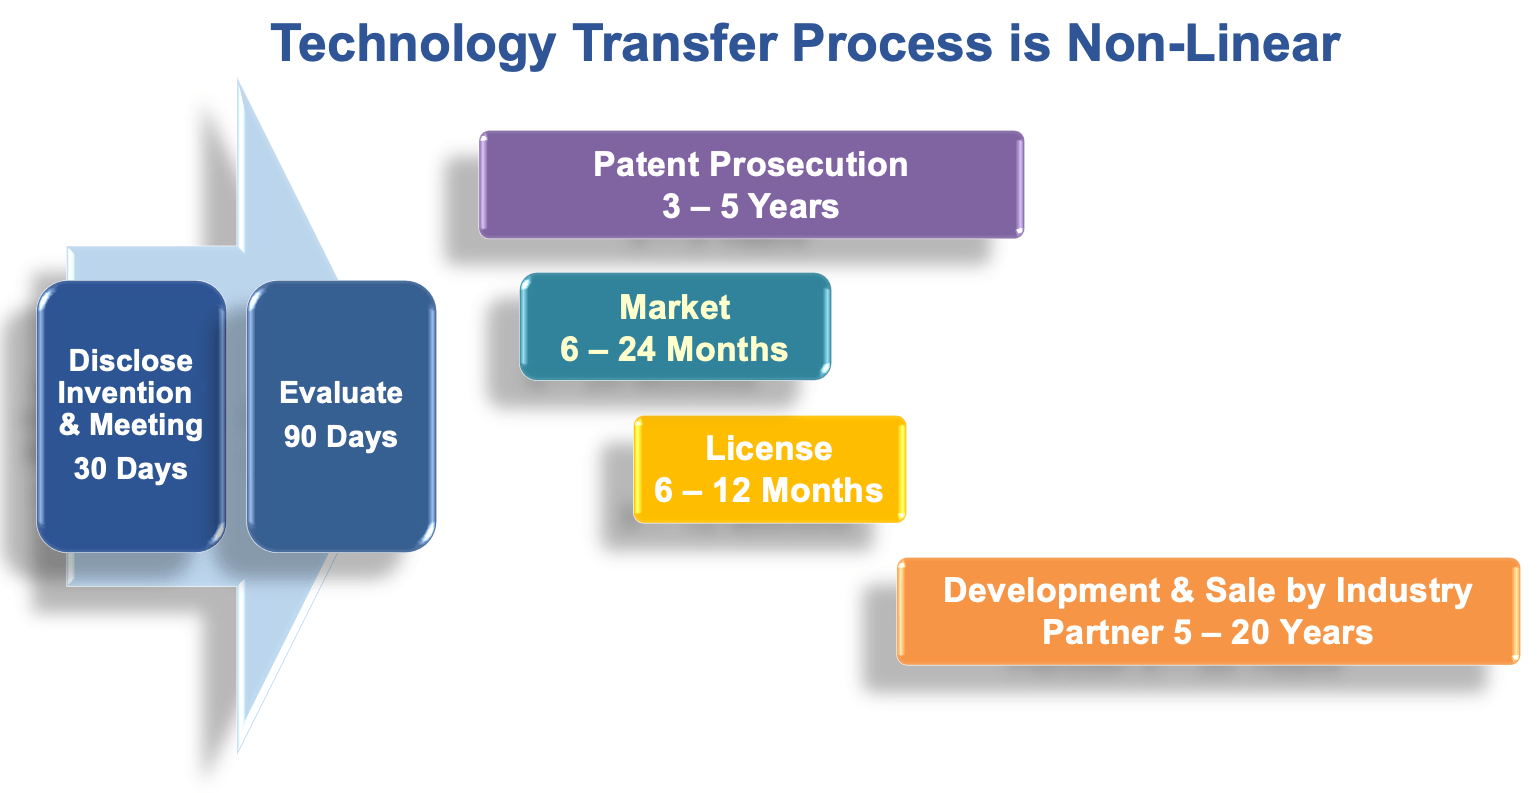 Technology Transfer process is non-linear